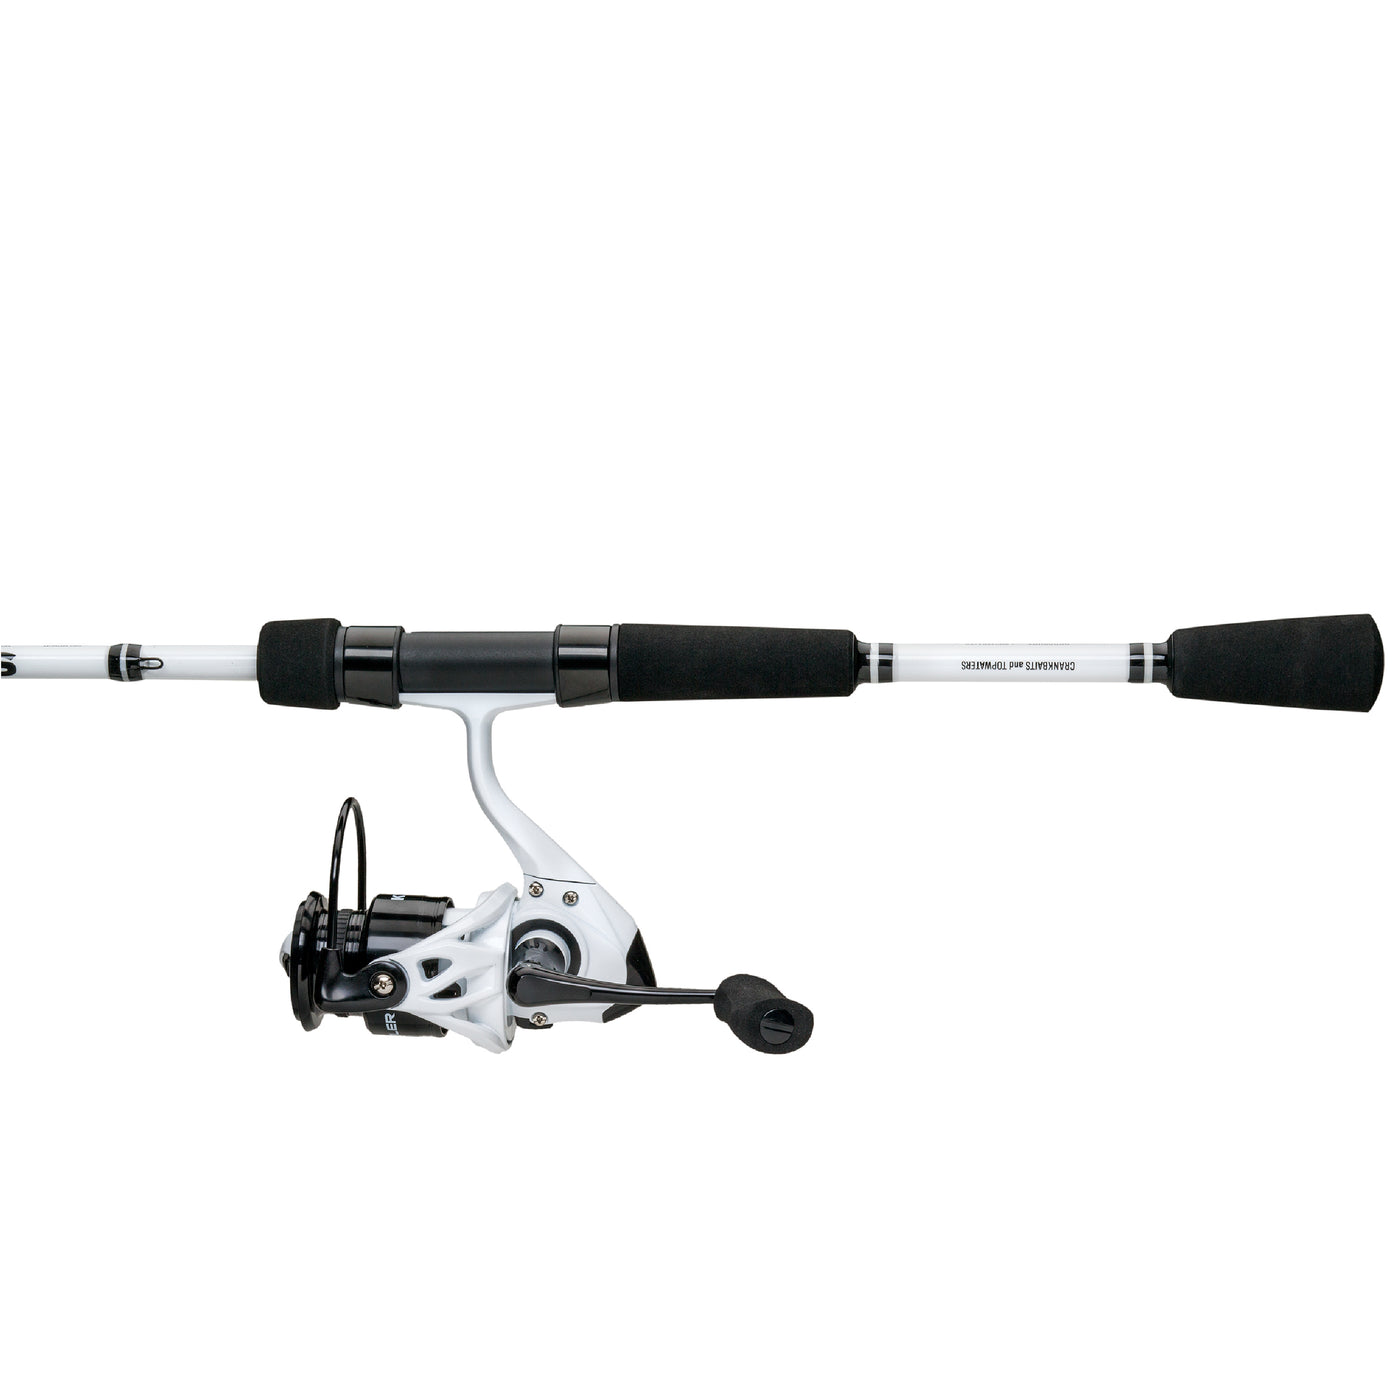 Reel Time review the Lews American Hero casting combo- Awesome combo for  under $100 